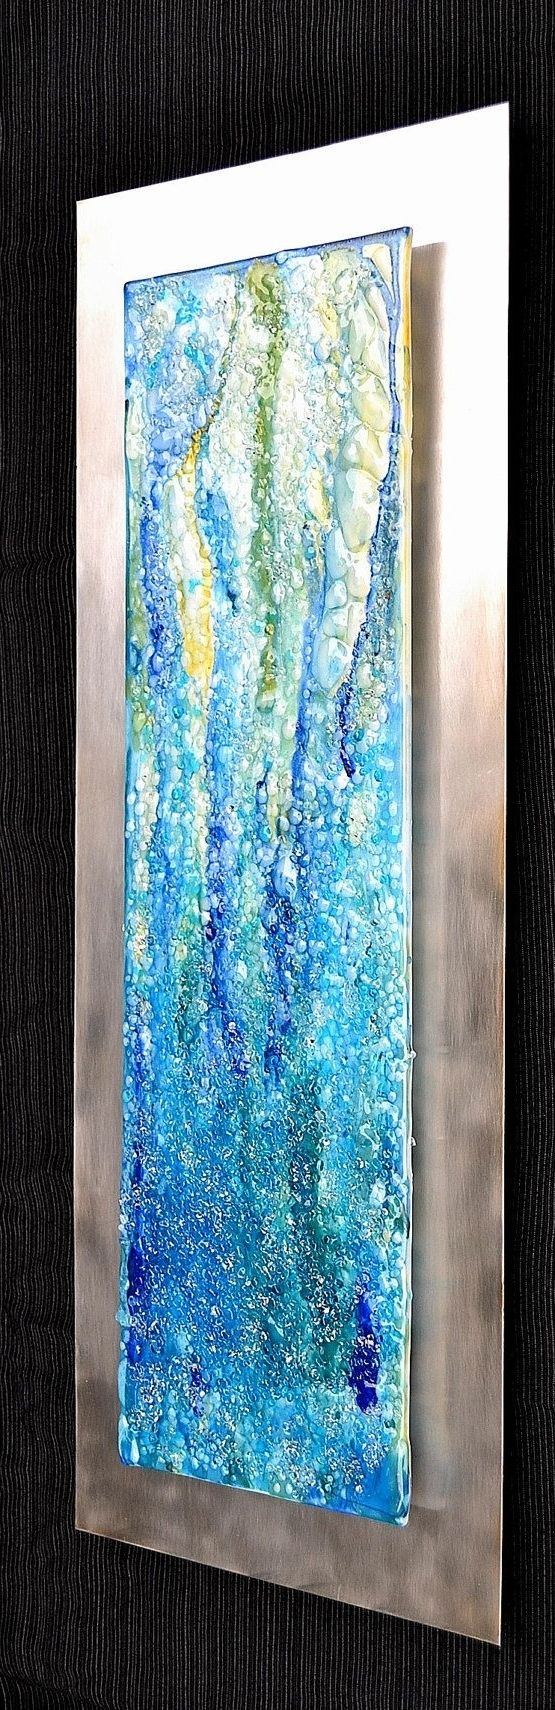 Waterfall – Modern Fused Glass Wall Hanging Art On Stainless Steel Pertaining To Most Recent Glass Wall Art (View 11 of 15)